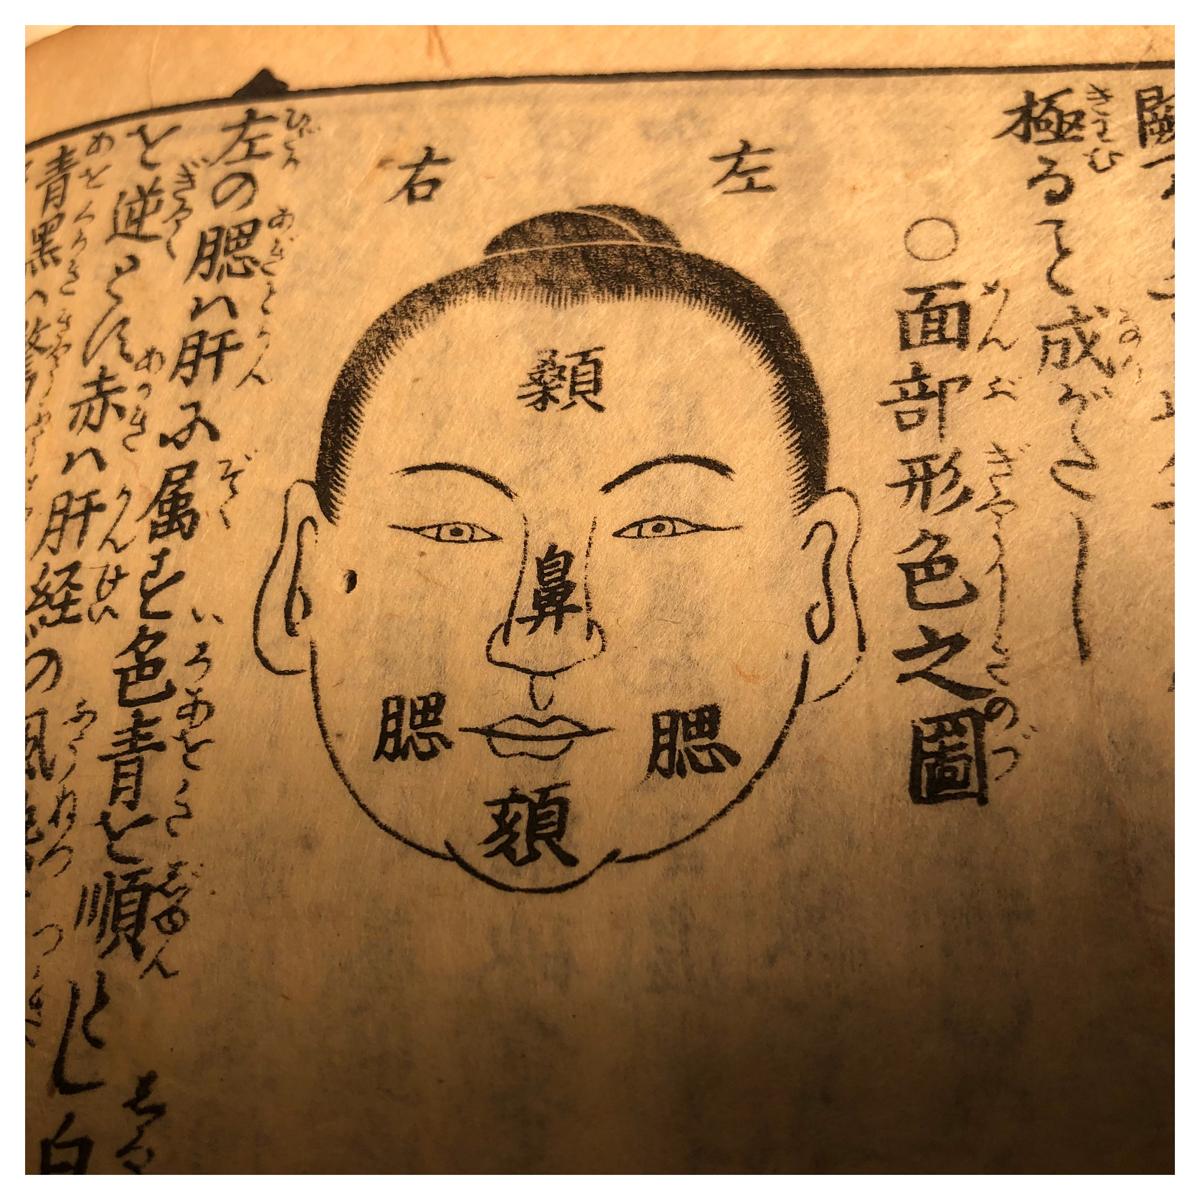 Important Chinese Acupuncture Antique Woodblock Hand Book, 19th Century Prints